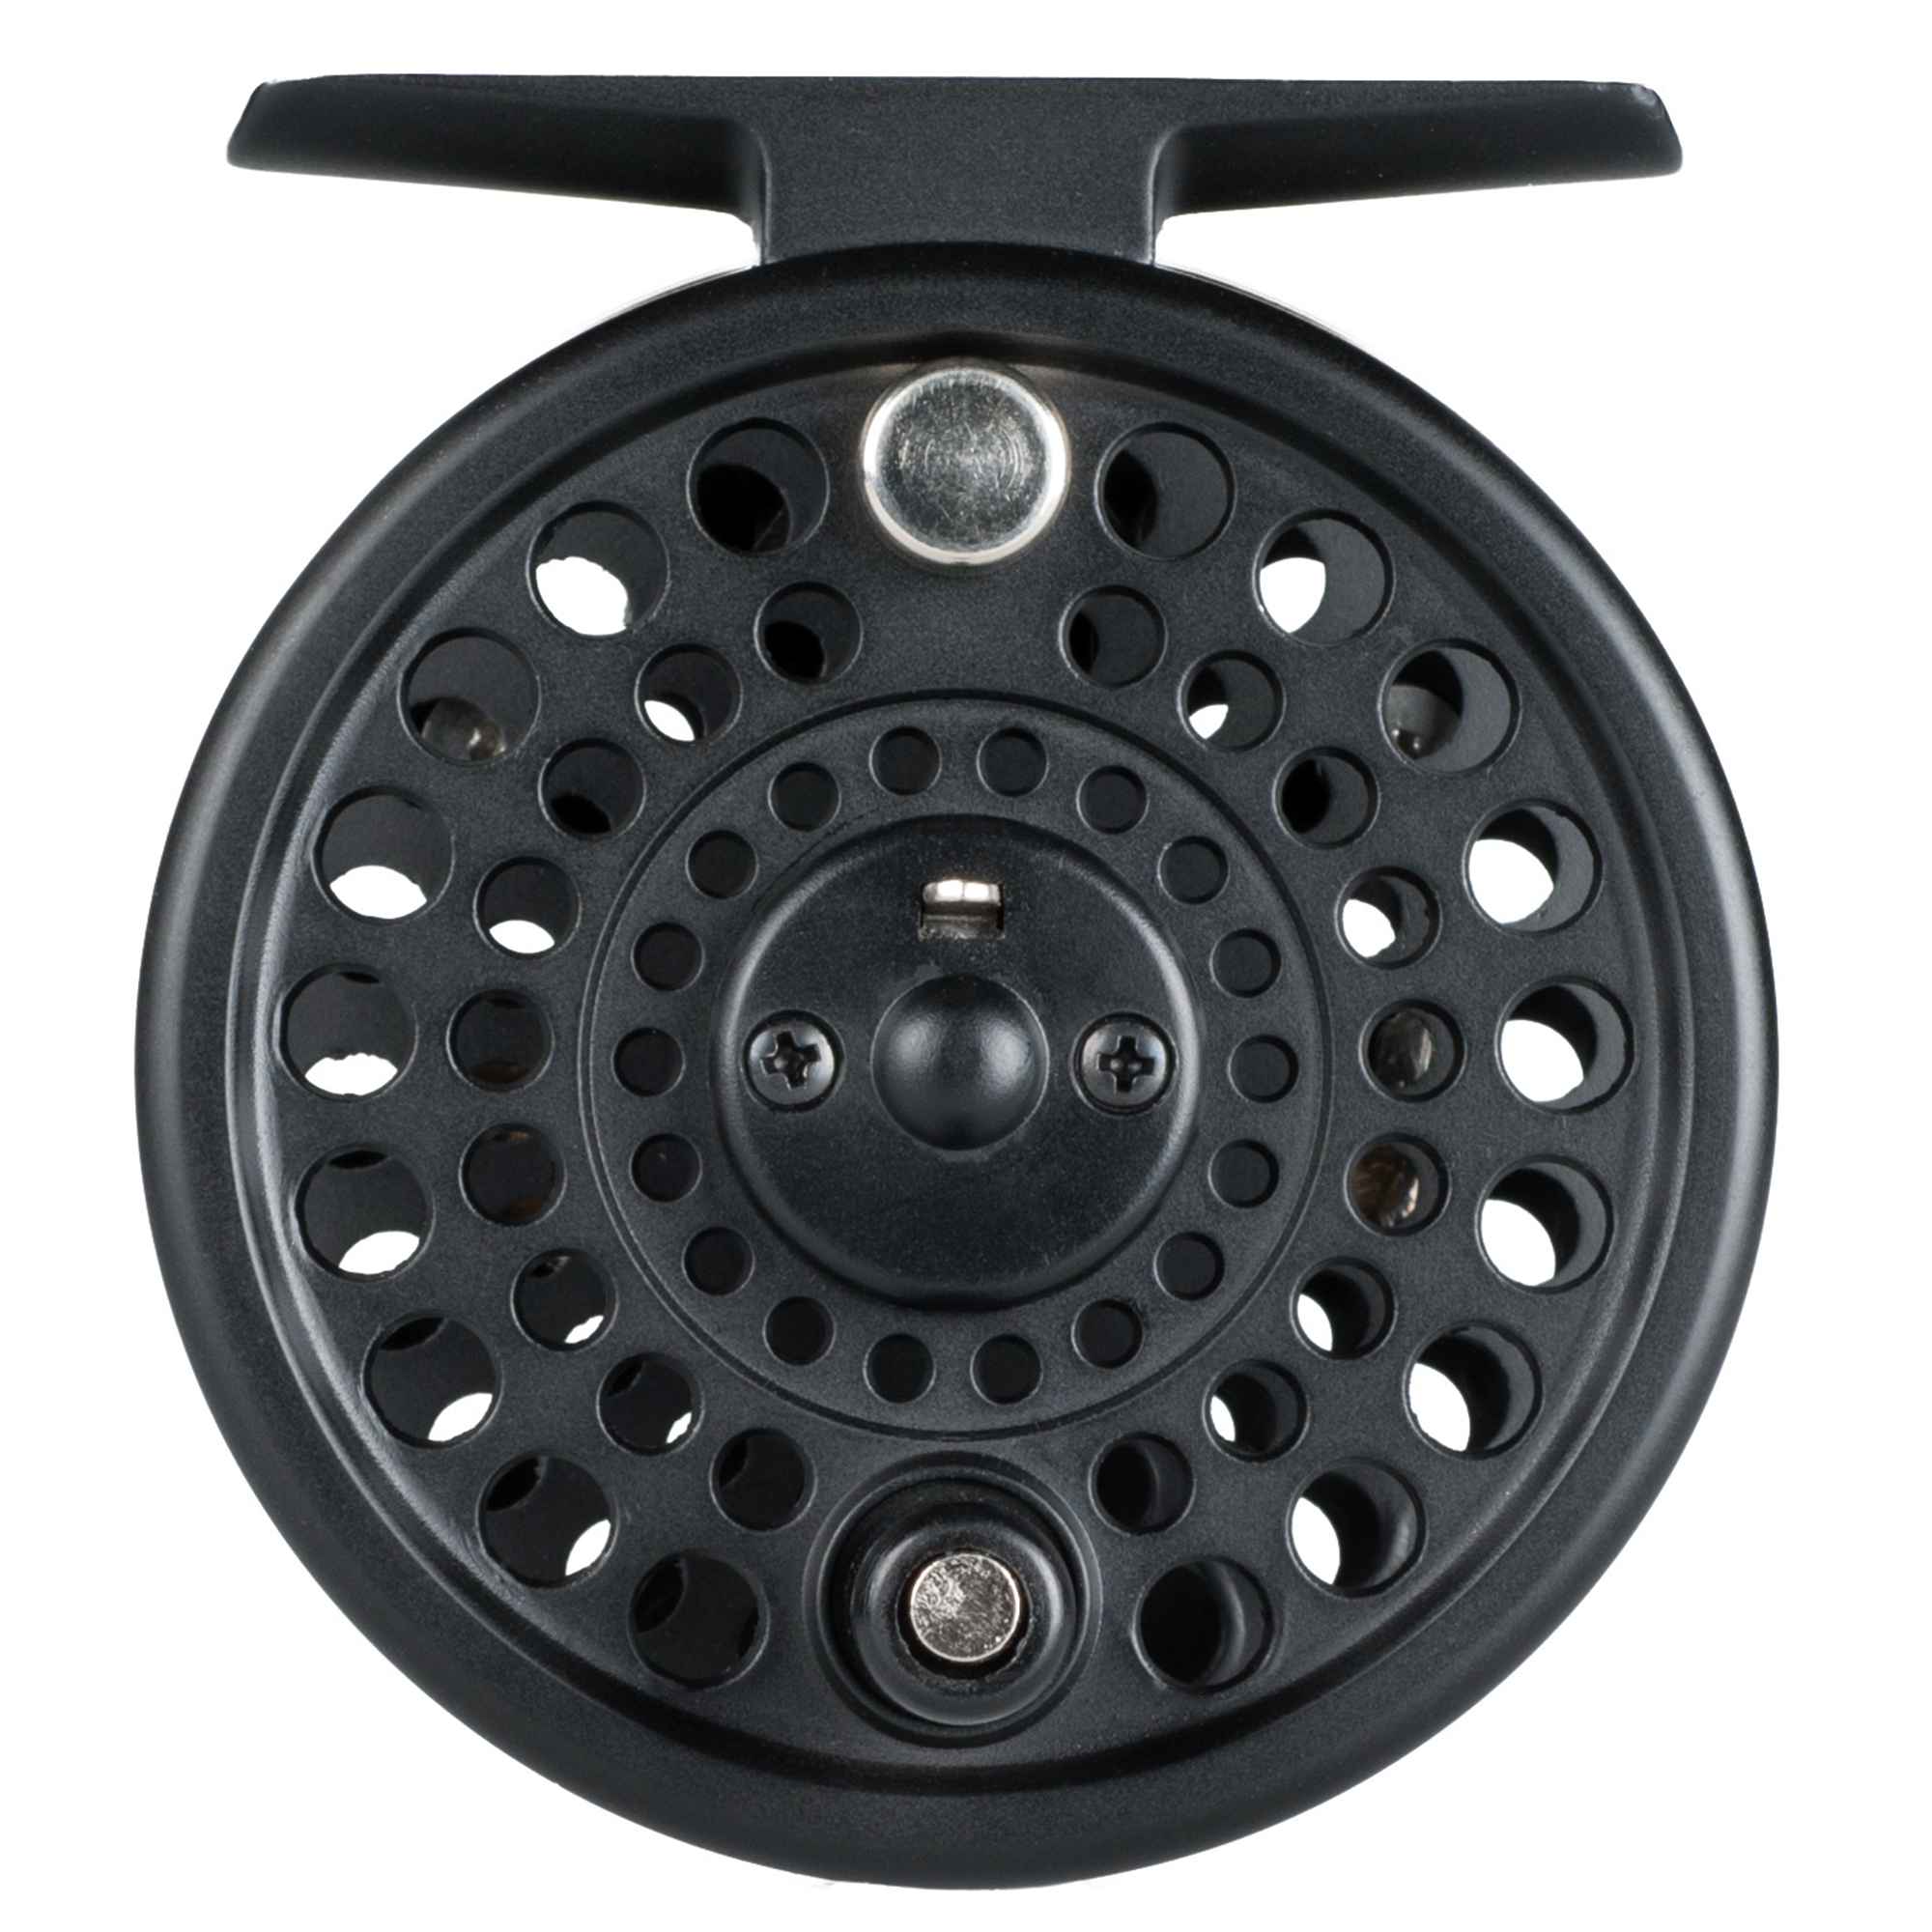 Pflueger MON56X Monarch 5/6wt 1.1:1 1370772 , 17% Off with Free S&H —  CampSaver